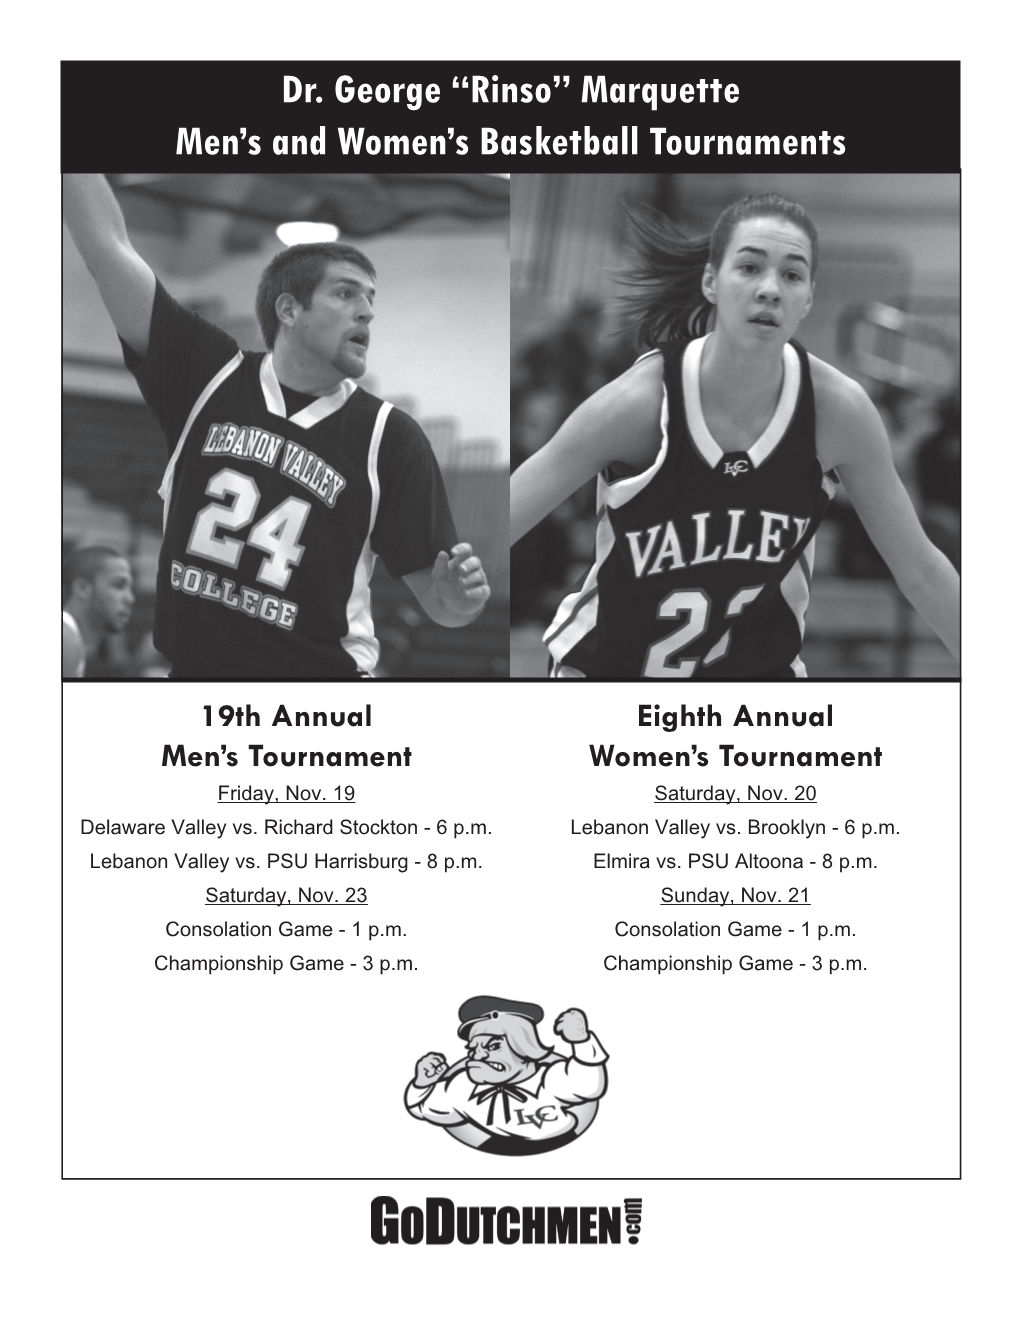 “Rinso” Marquette Men's and Women's Basketball Tournaments